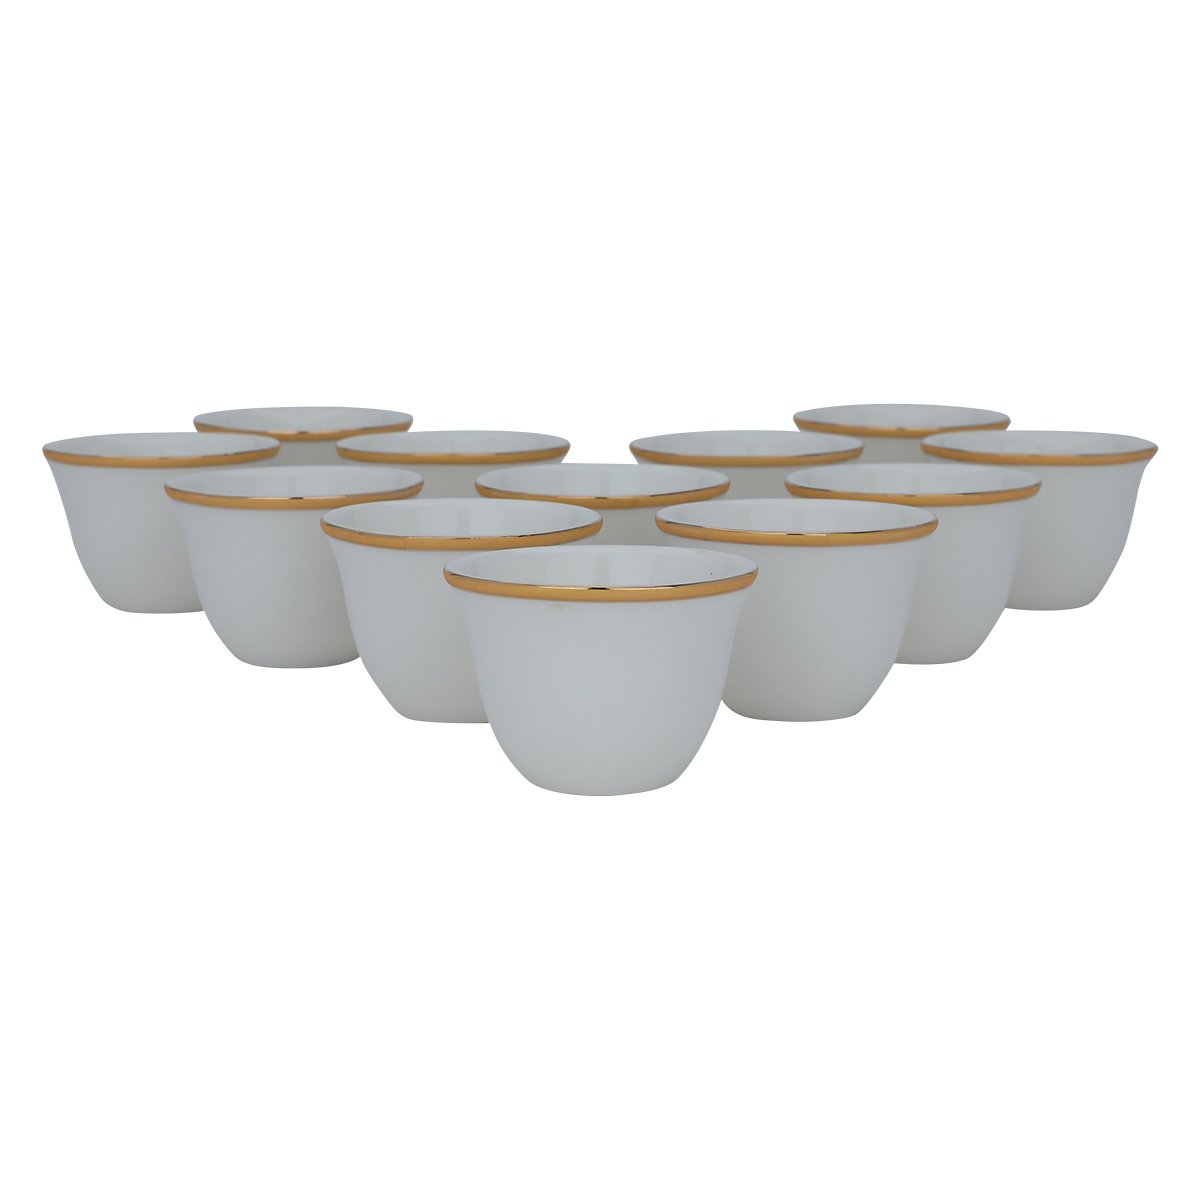 Cup set is the perfect choice if you are a fan of pieces that 